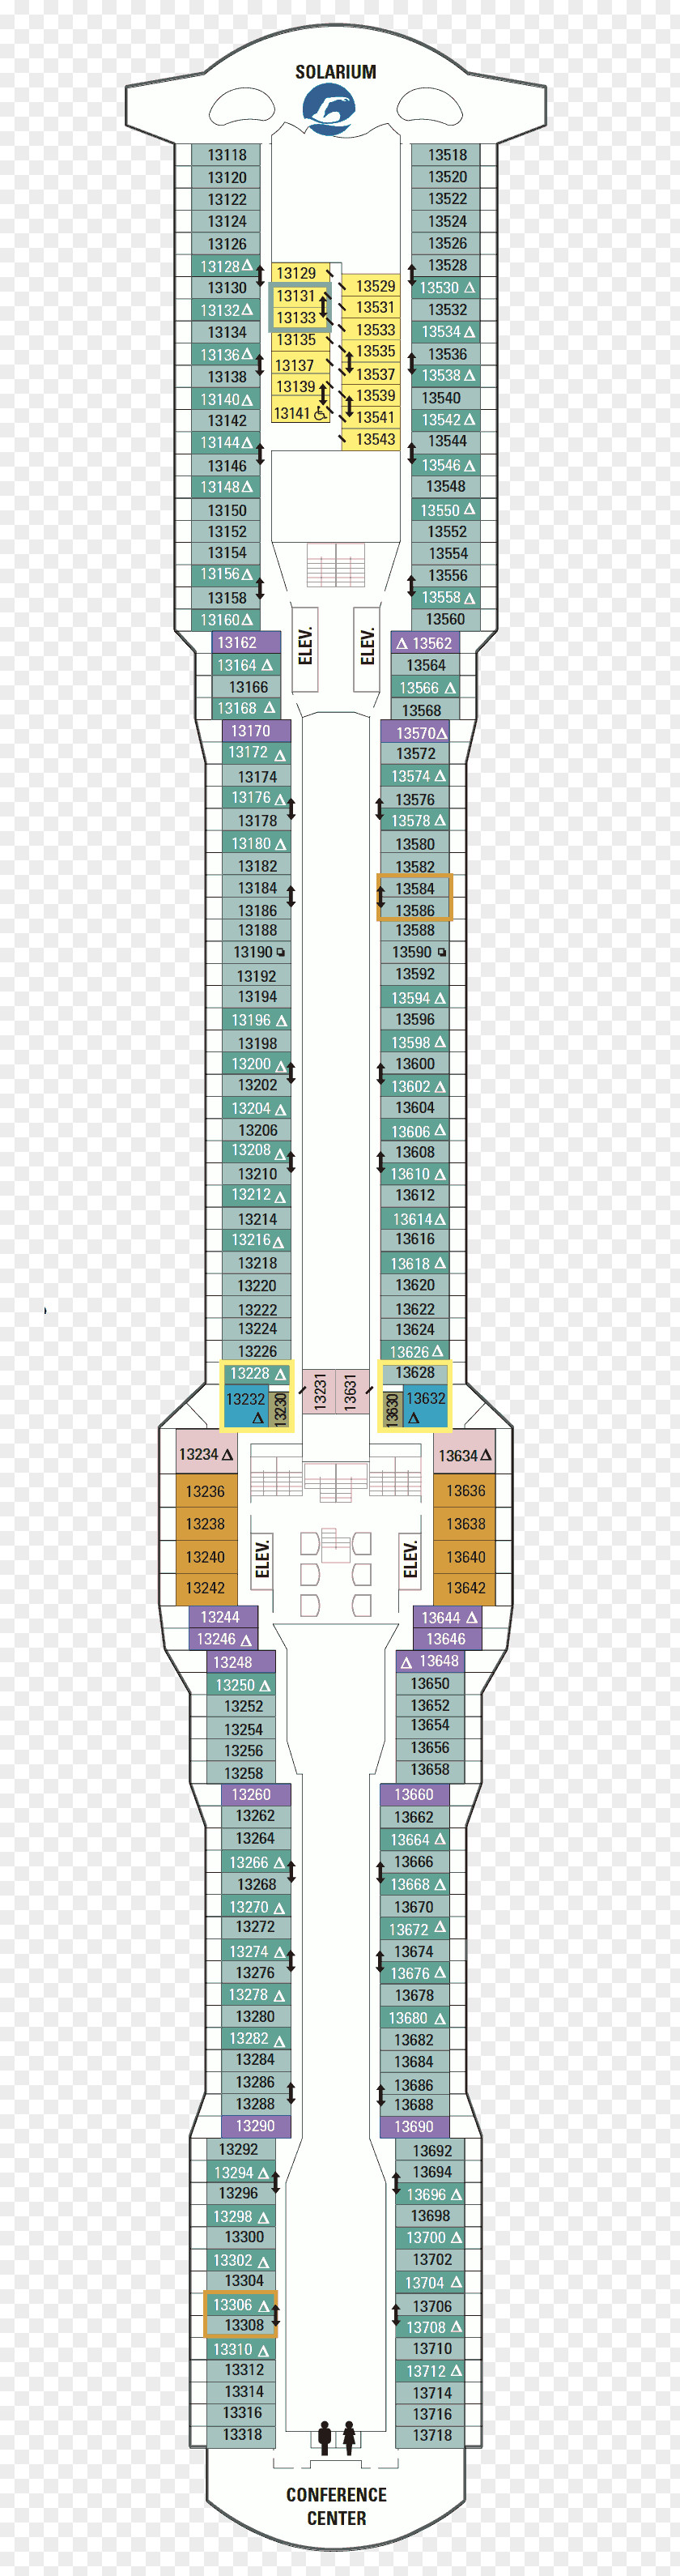 Building Floor Plan Deck MS Ovation Of The Seas PNG